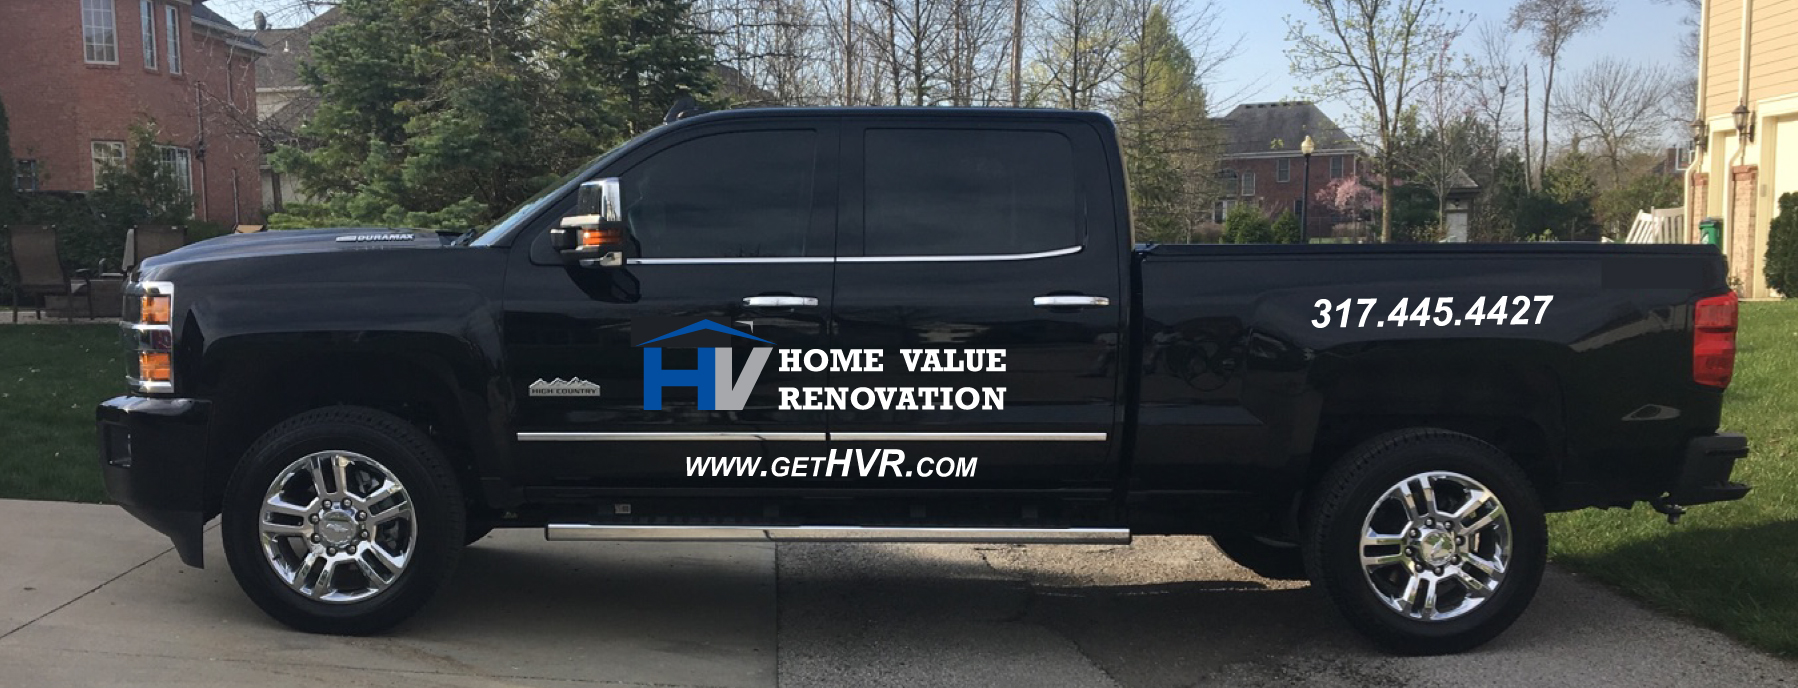 Home Value Renovations work truck